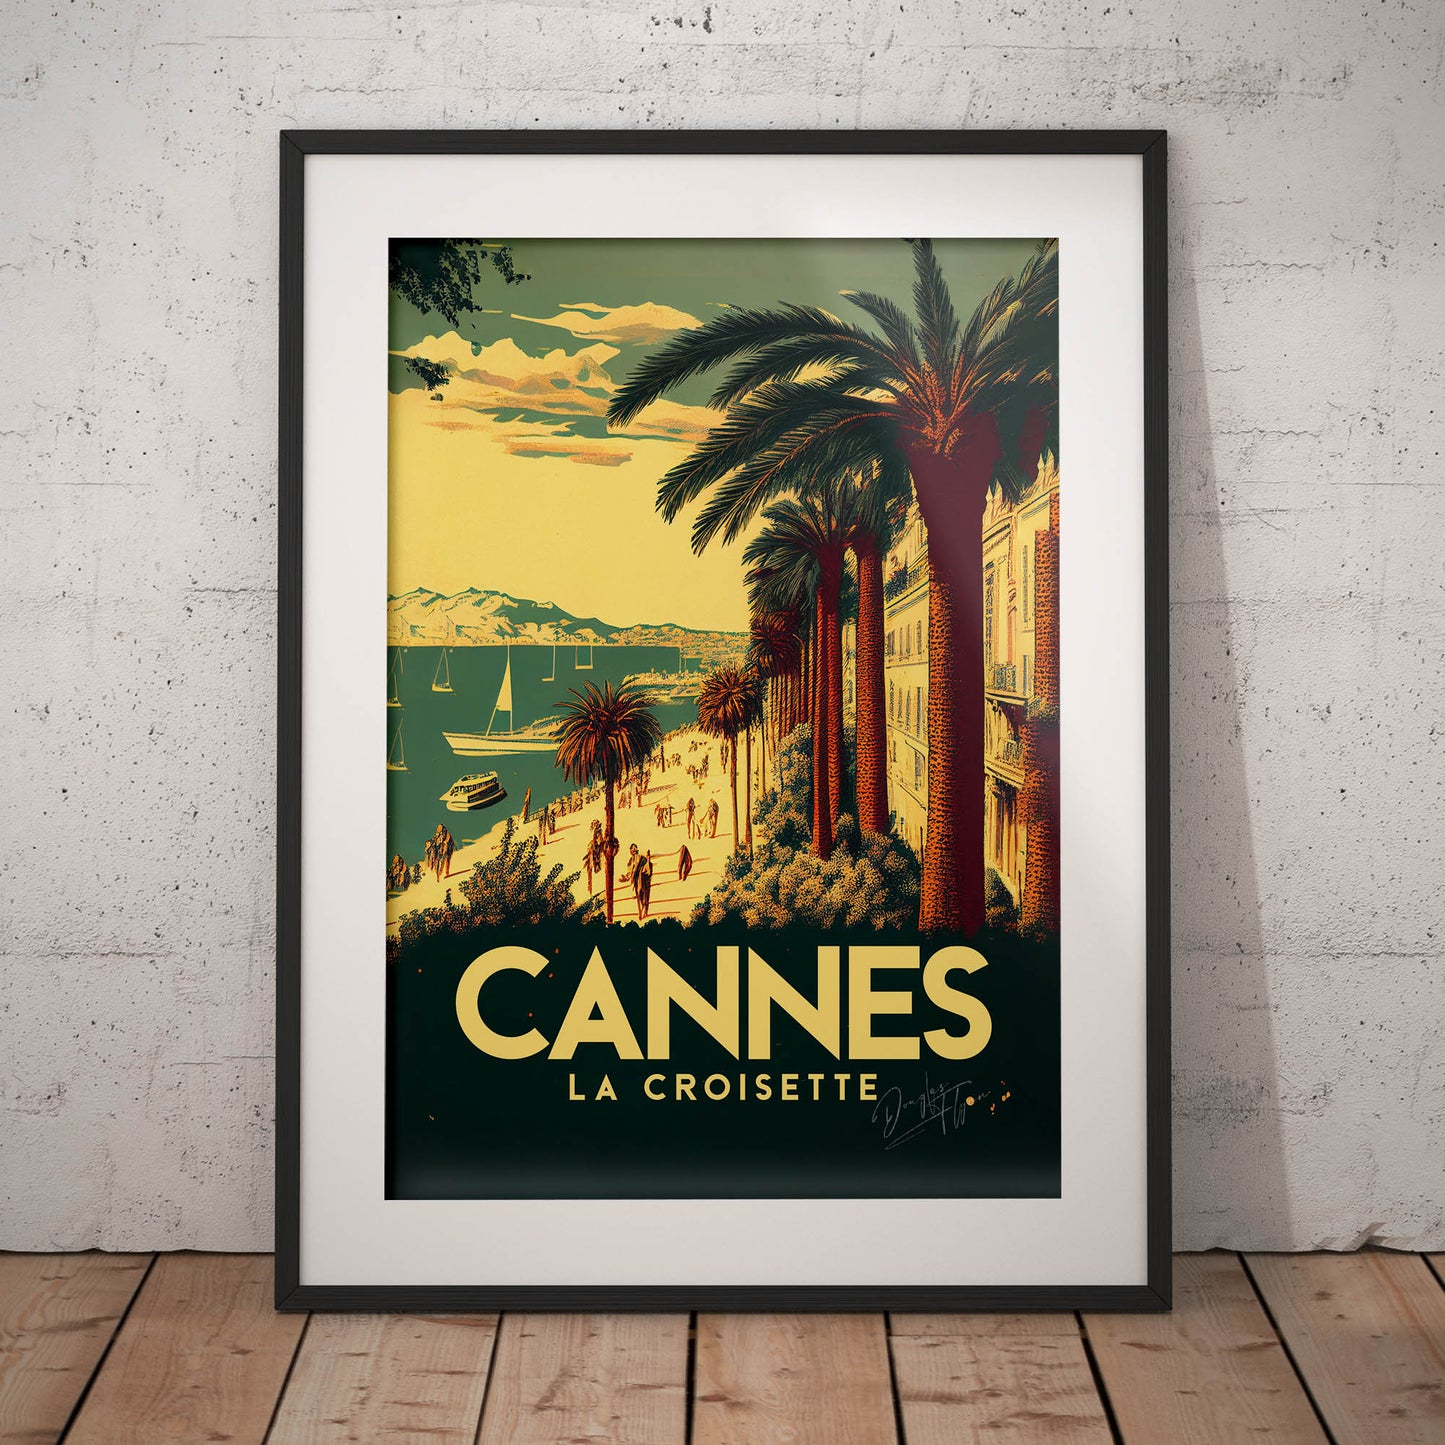 »Cannes, travel poster no 2« retro poster